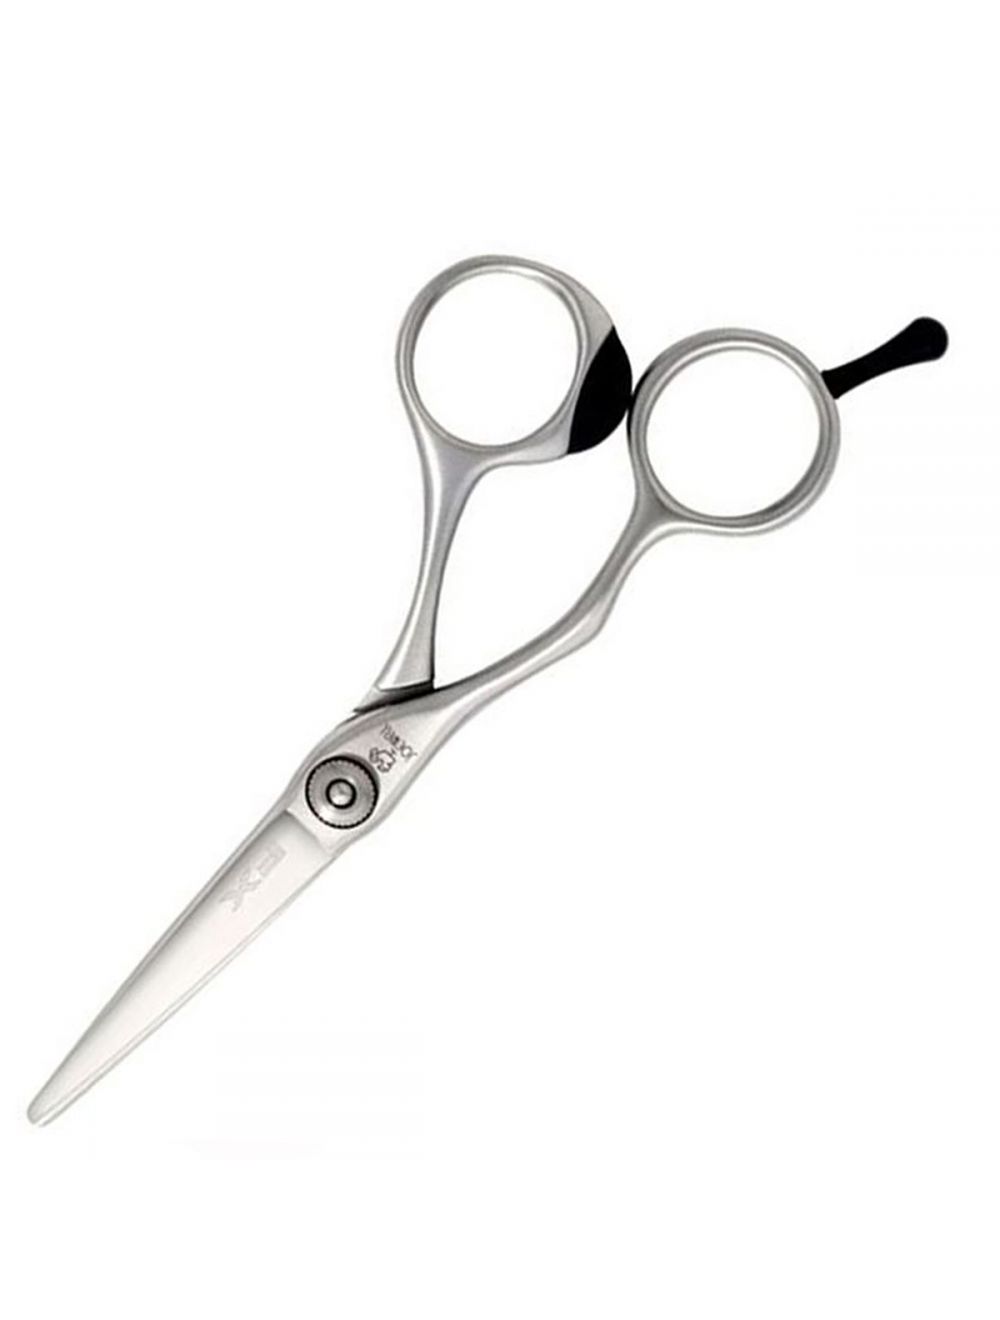 Joewell FX Left Handed Hairdressing Scissors, 5.5" - Ultimate Hair and Beauty